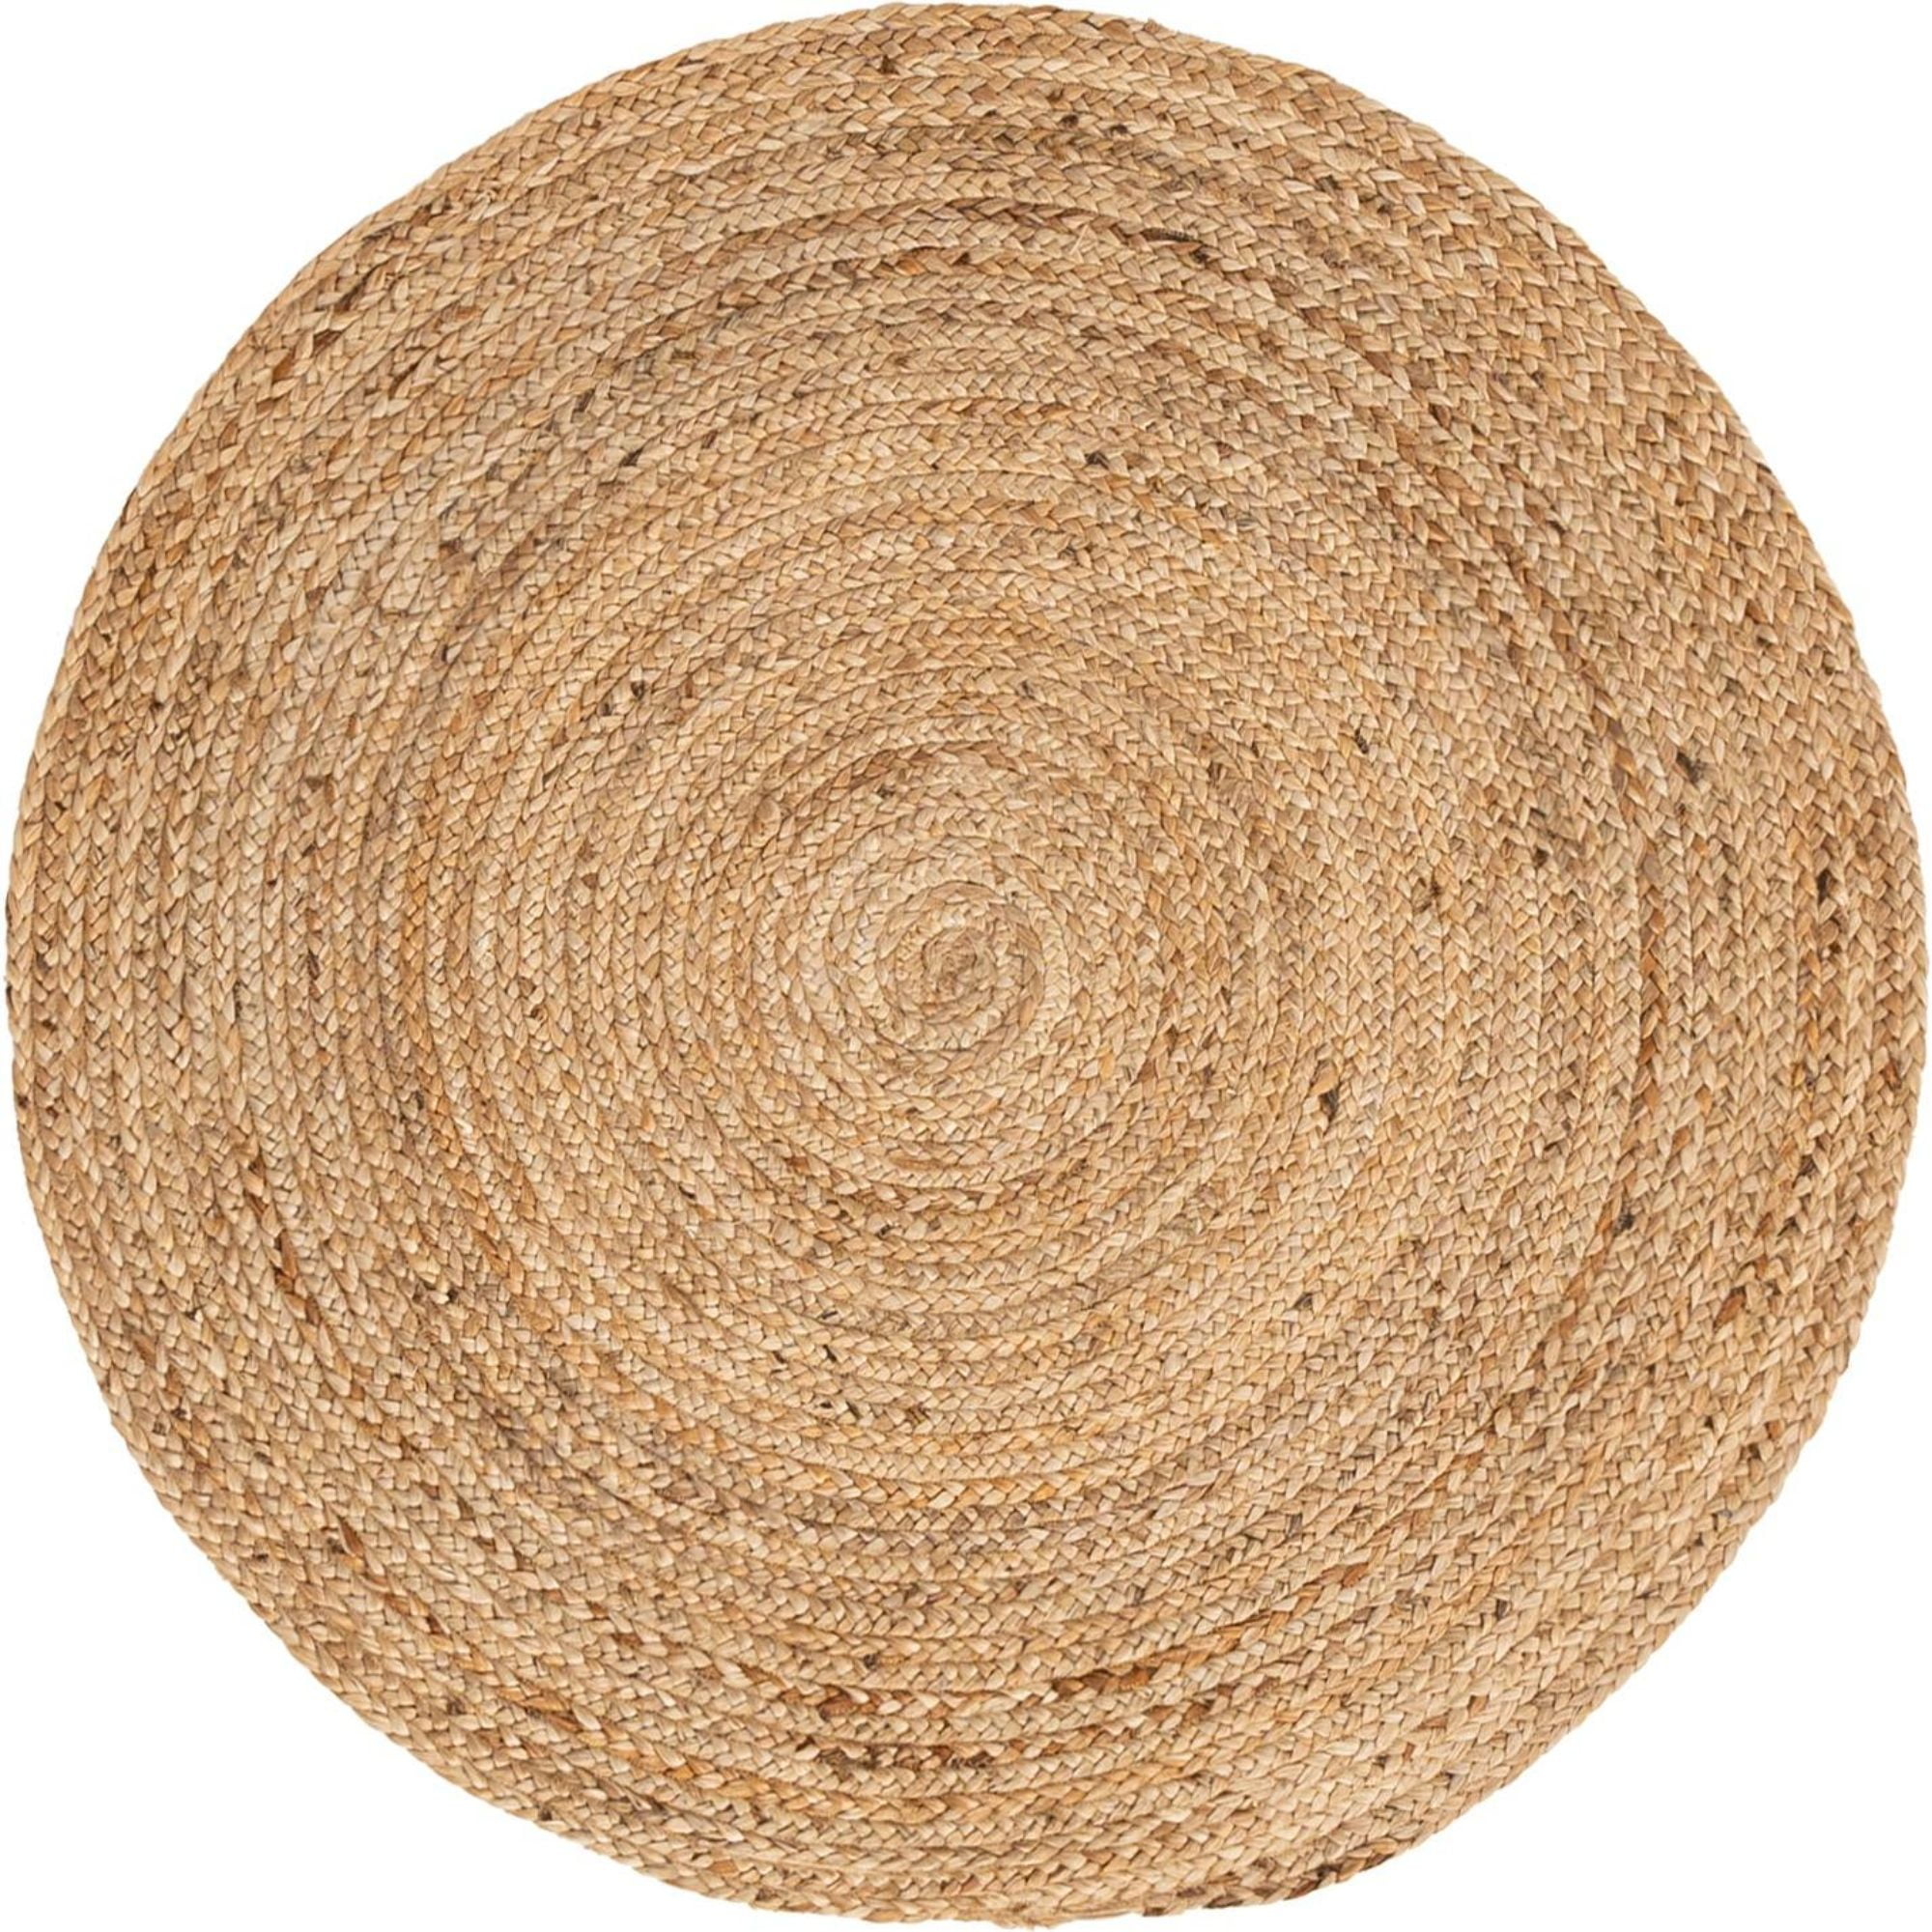 Unique Loom Dhaka Braided Jute Rug Natural 4' 1" Round Braided Solid Coastal Perfect For Dining Room Entryway Bed Room Kids Room -New in Box